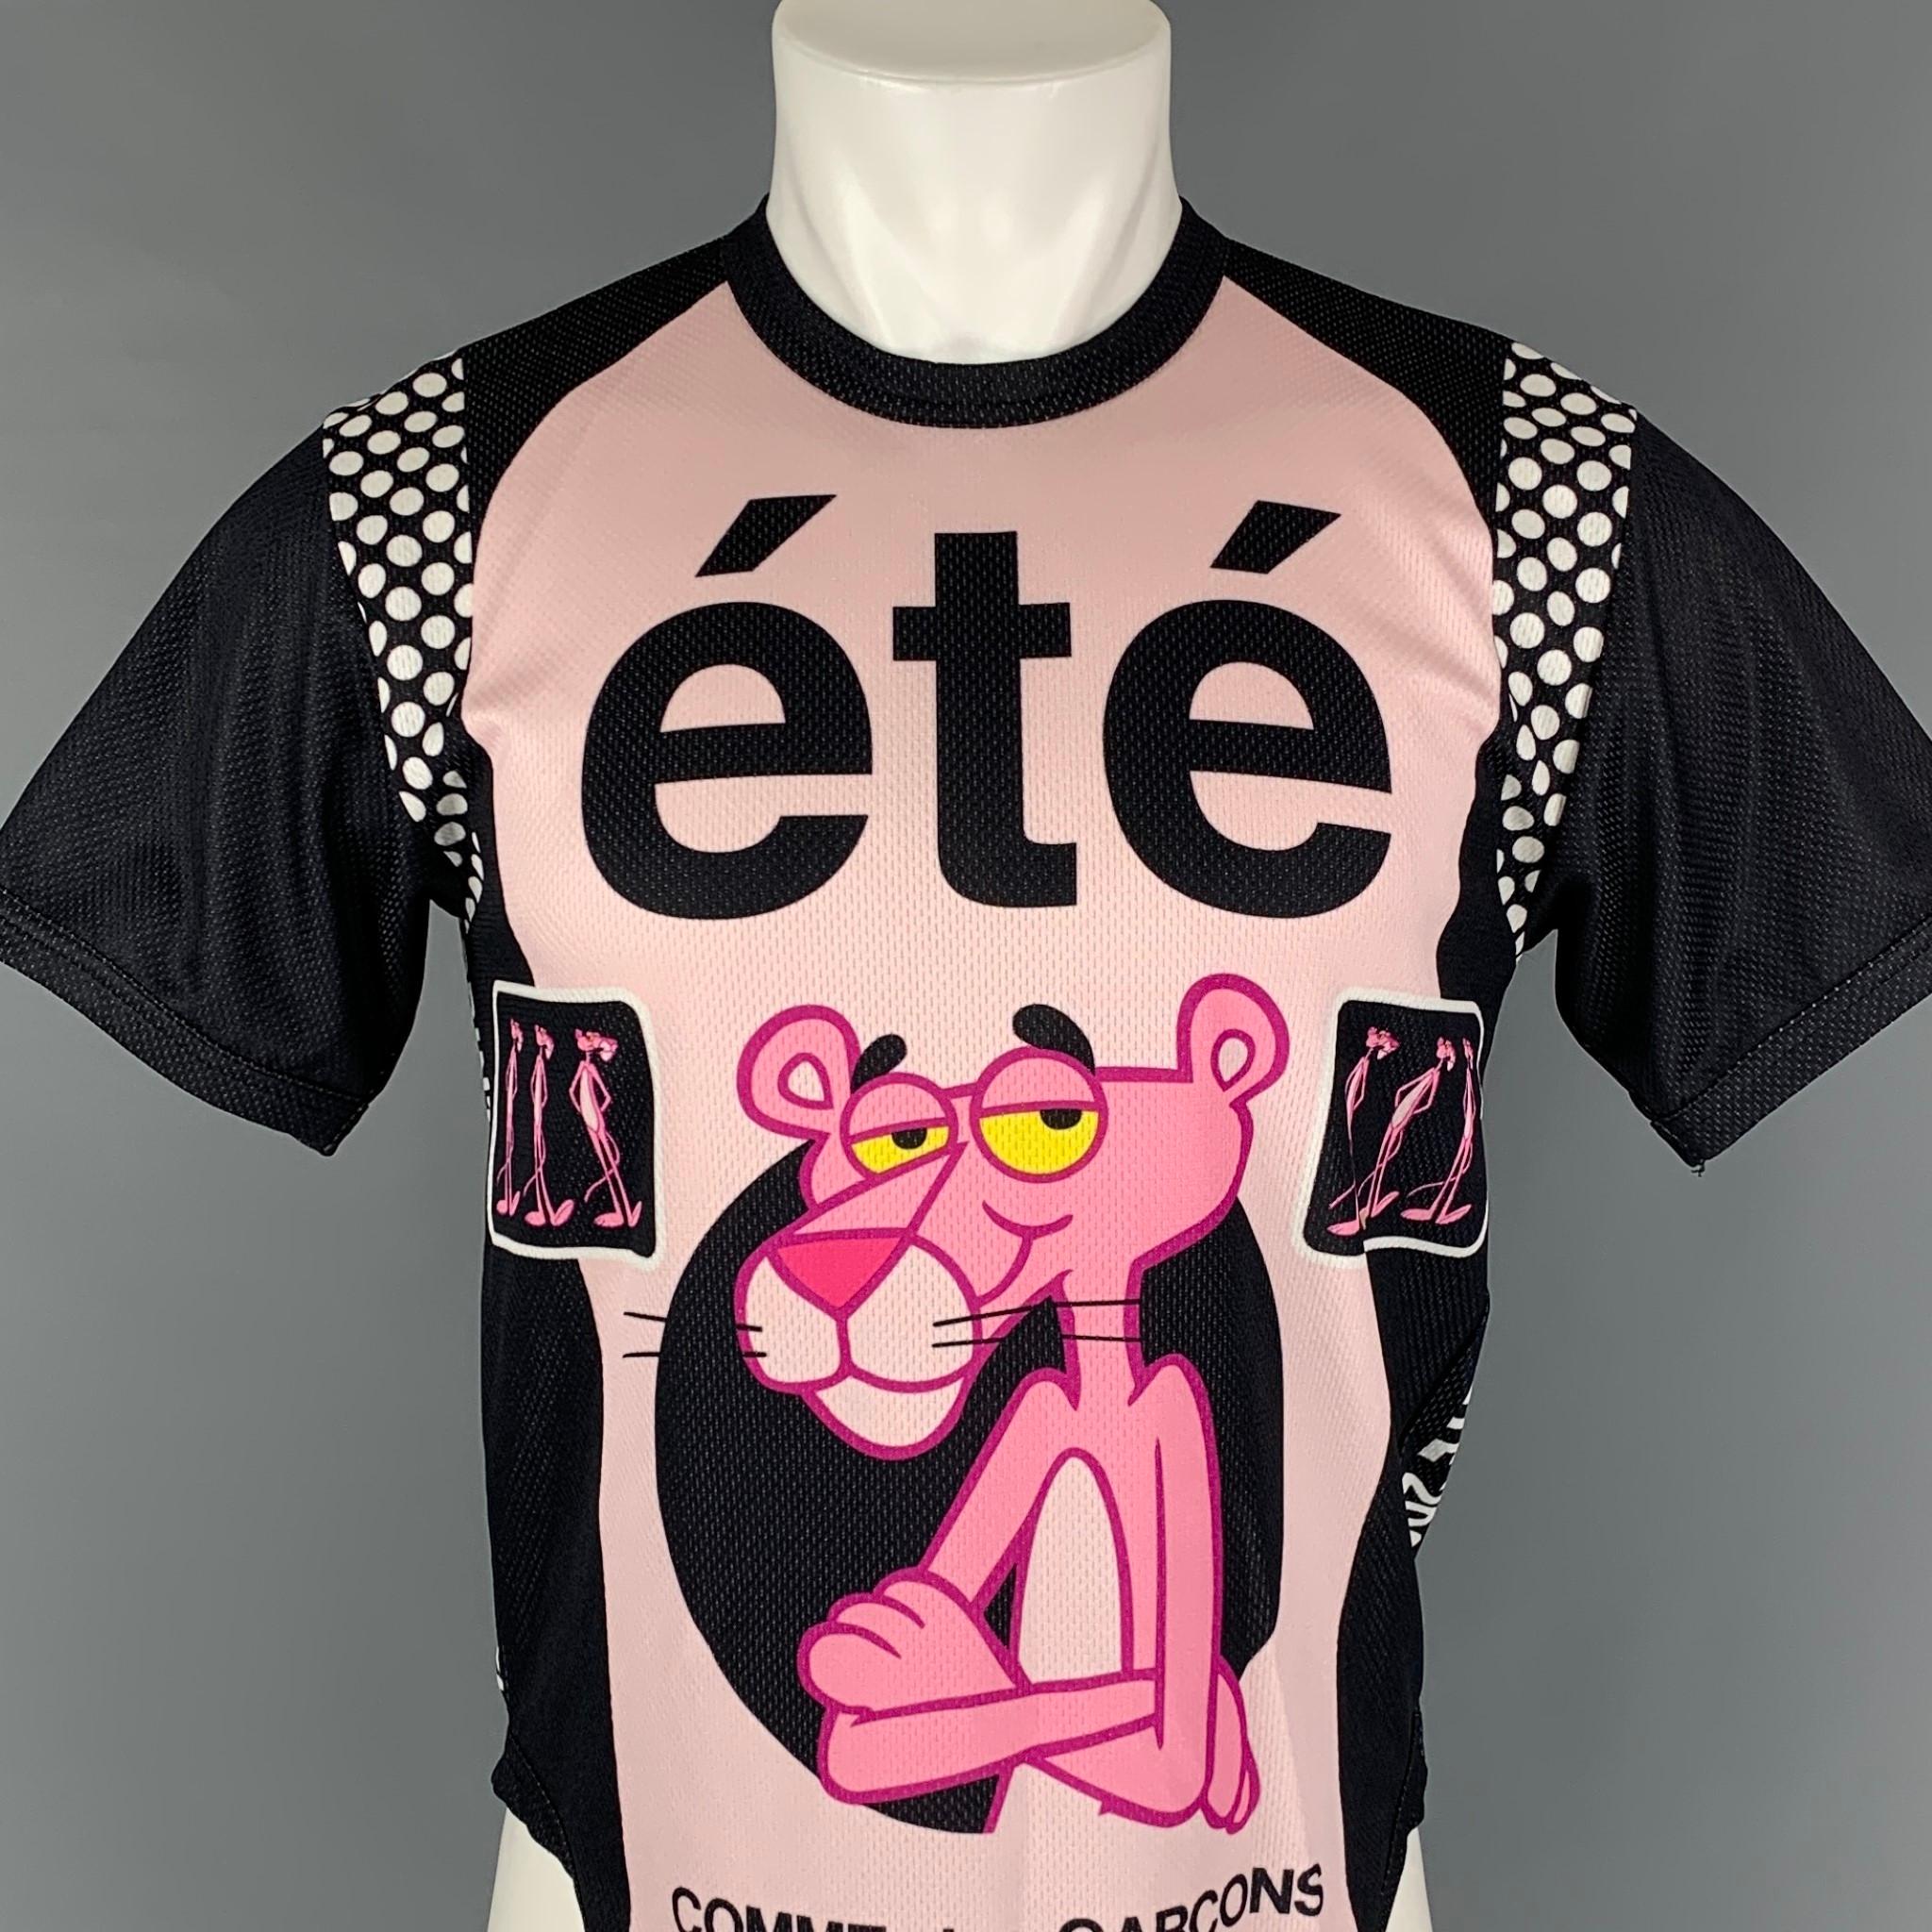 Vintage COMME des GARCONS HOMME PLUS SS 2005 by Rei Kawakubo t-shirt comes in a pink & black polyester with a pink panther logo design featuring short sleeves and a crew-neck. Made in Japan. 

Very Good Pre-Owned Condition.
Marked: